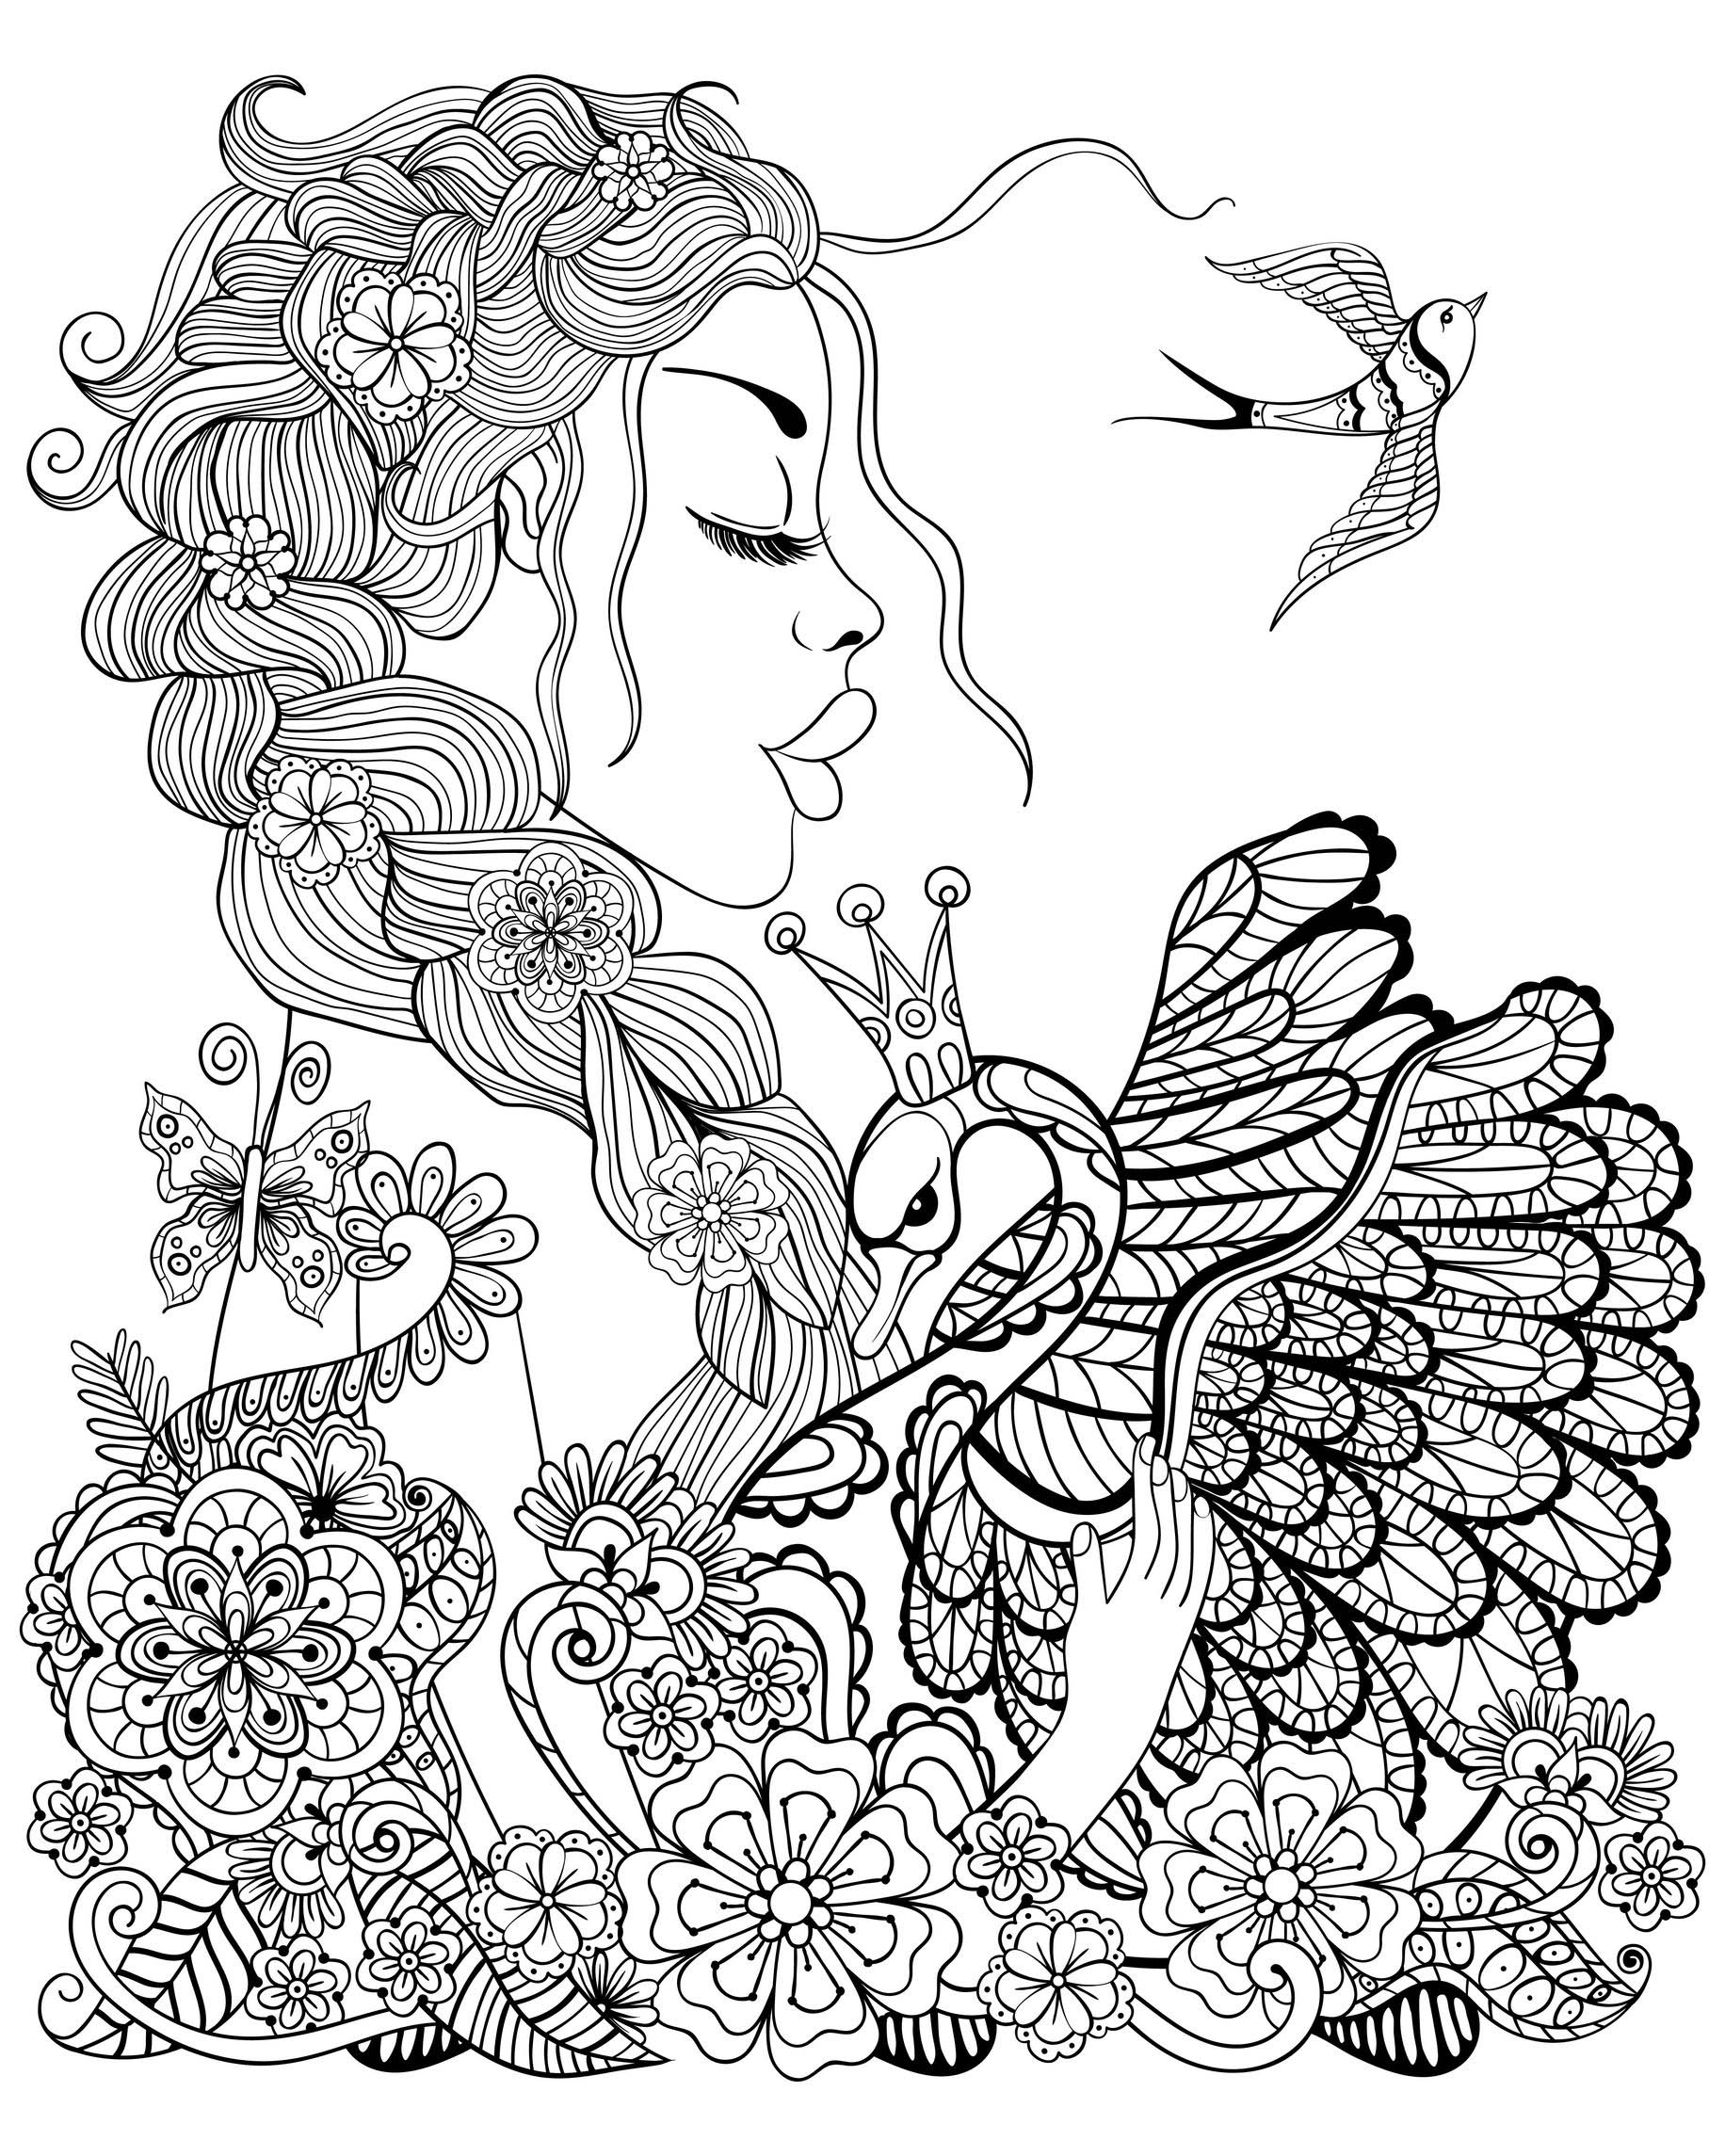 Simple Birds coloring page for children, Artist : Ipanki   Source : 123rf